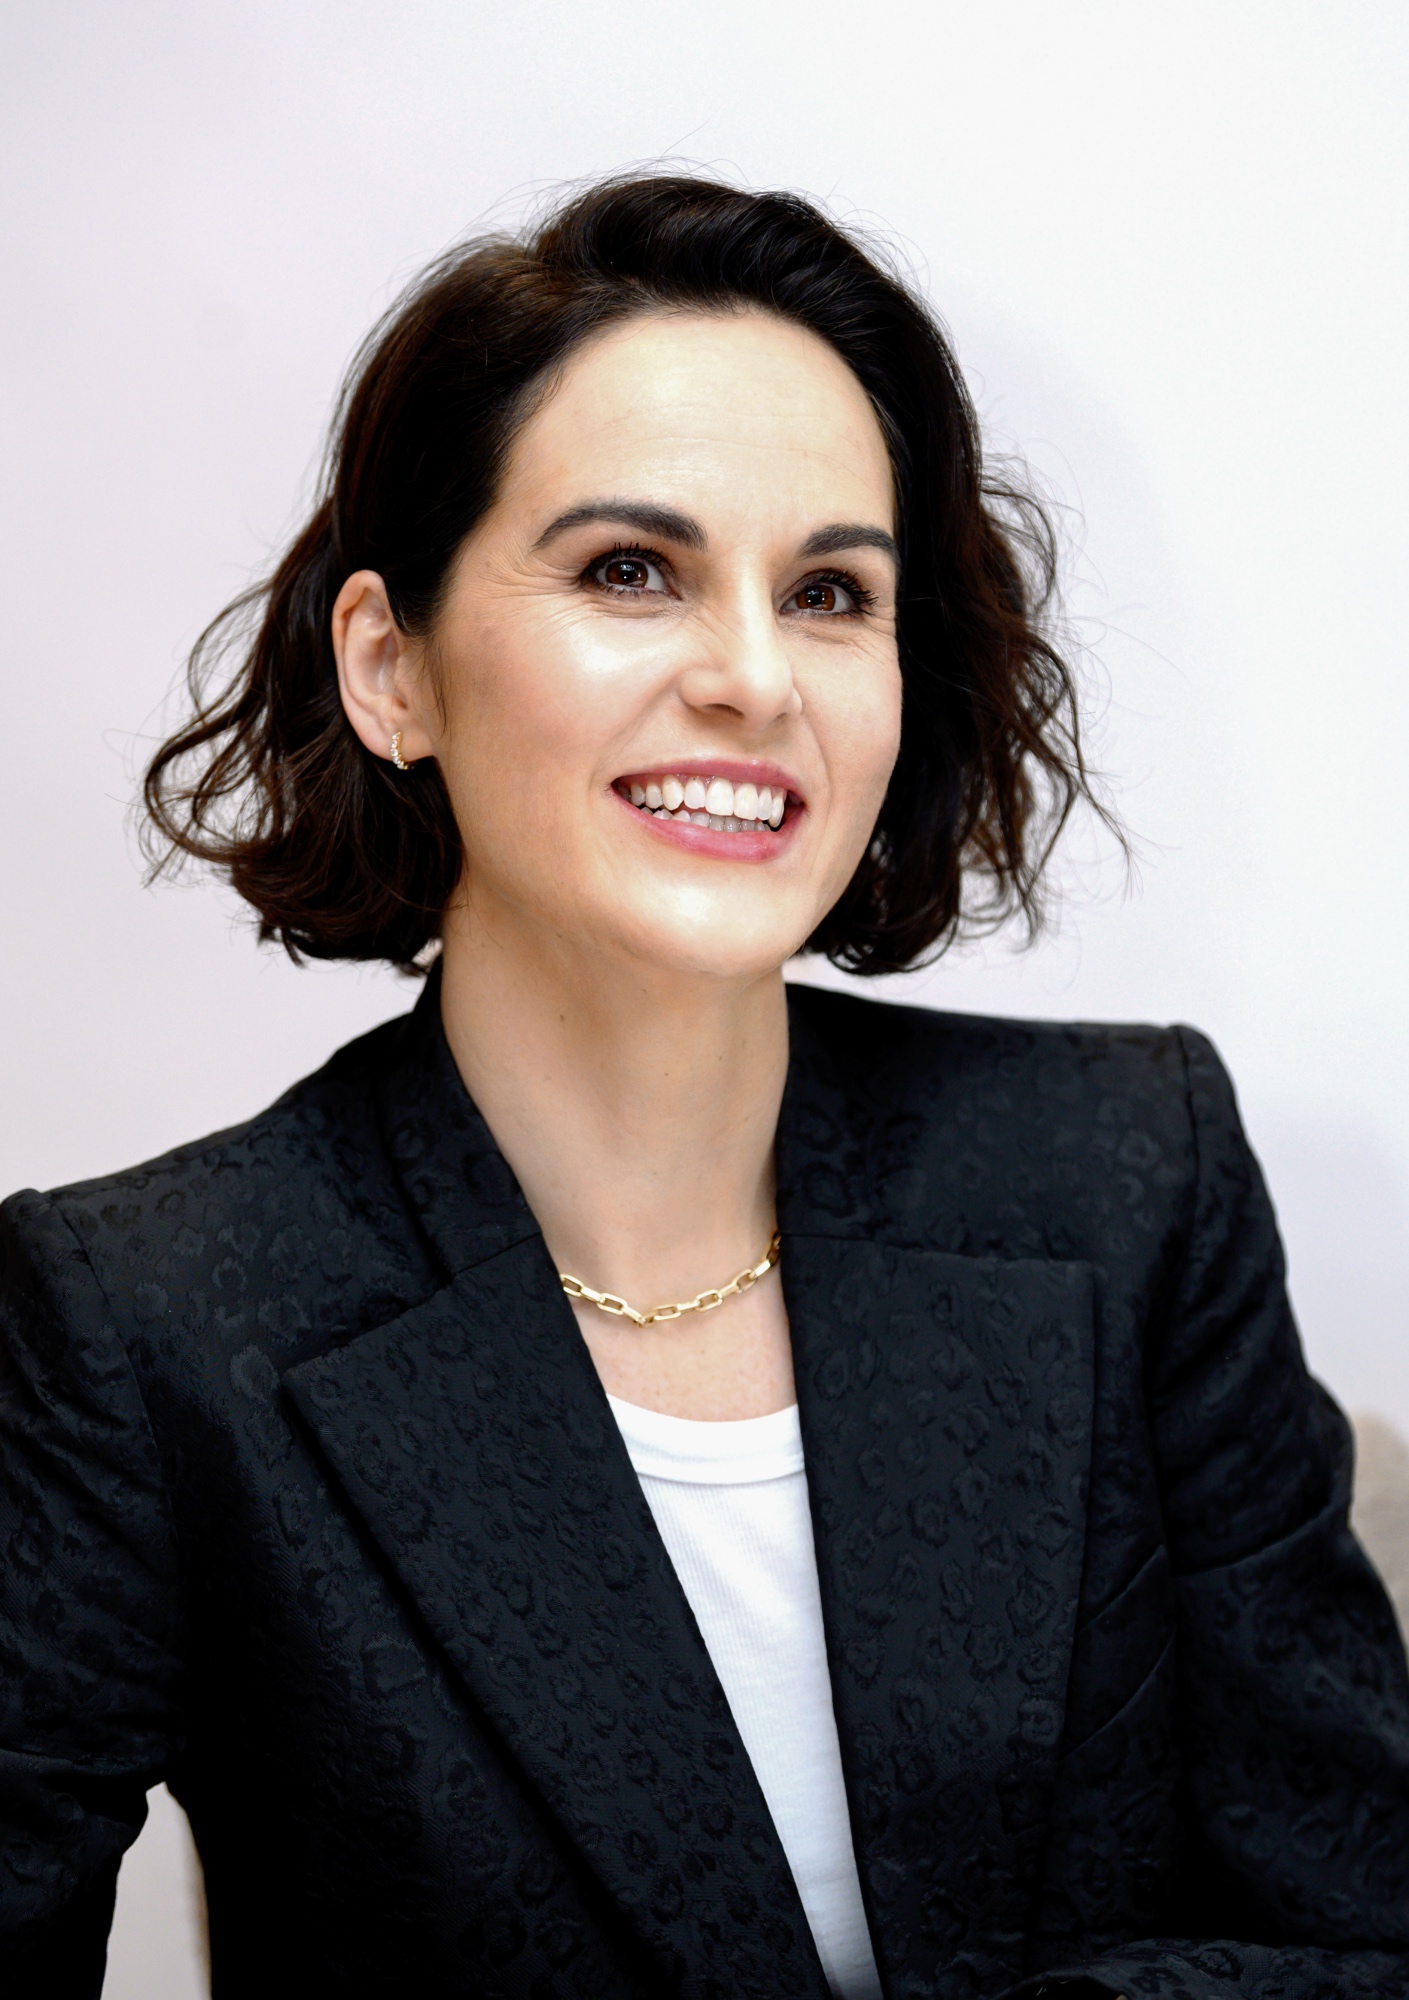 Michelle Dockery on Downton Abbey, Defending Jacob and Stereotypes ...